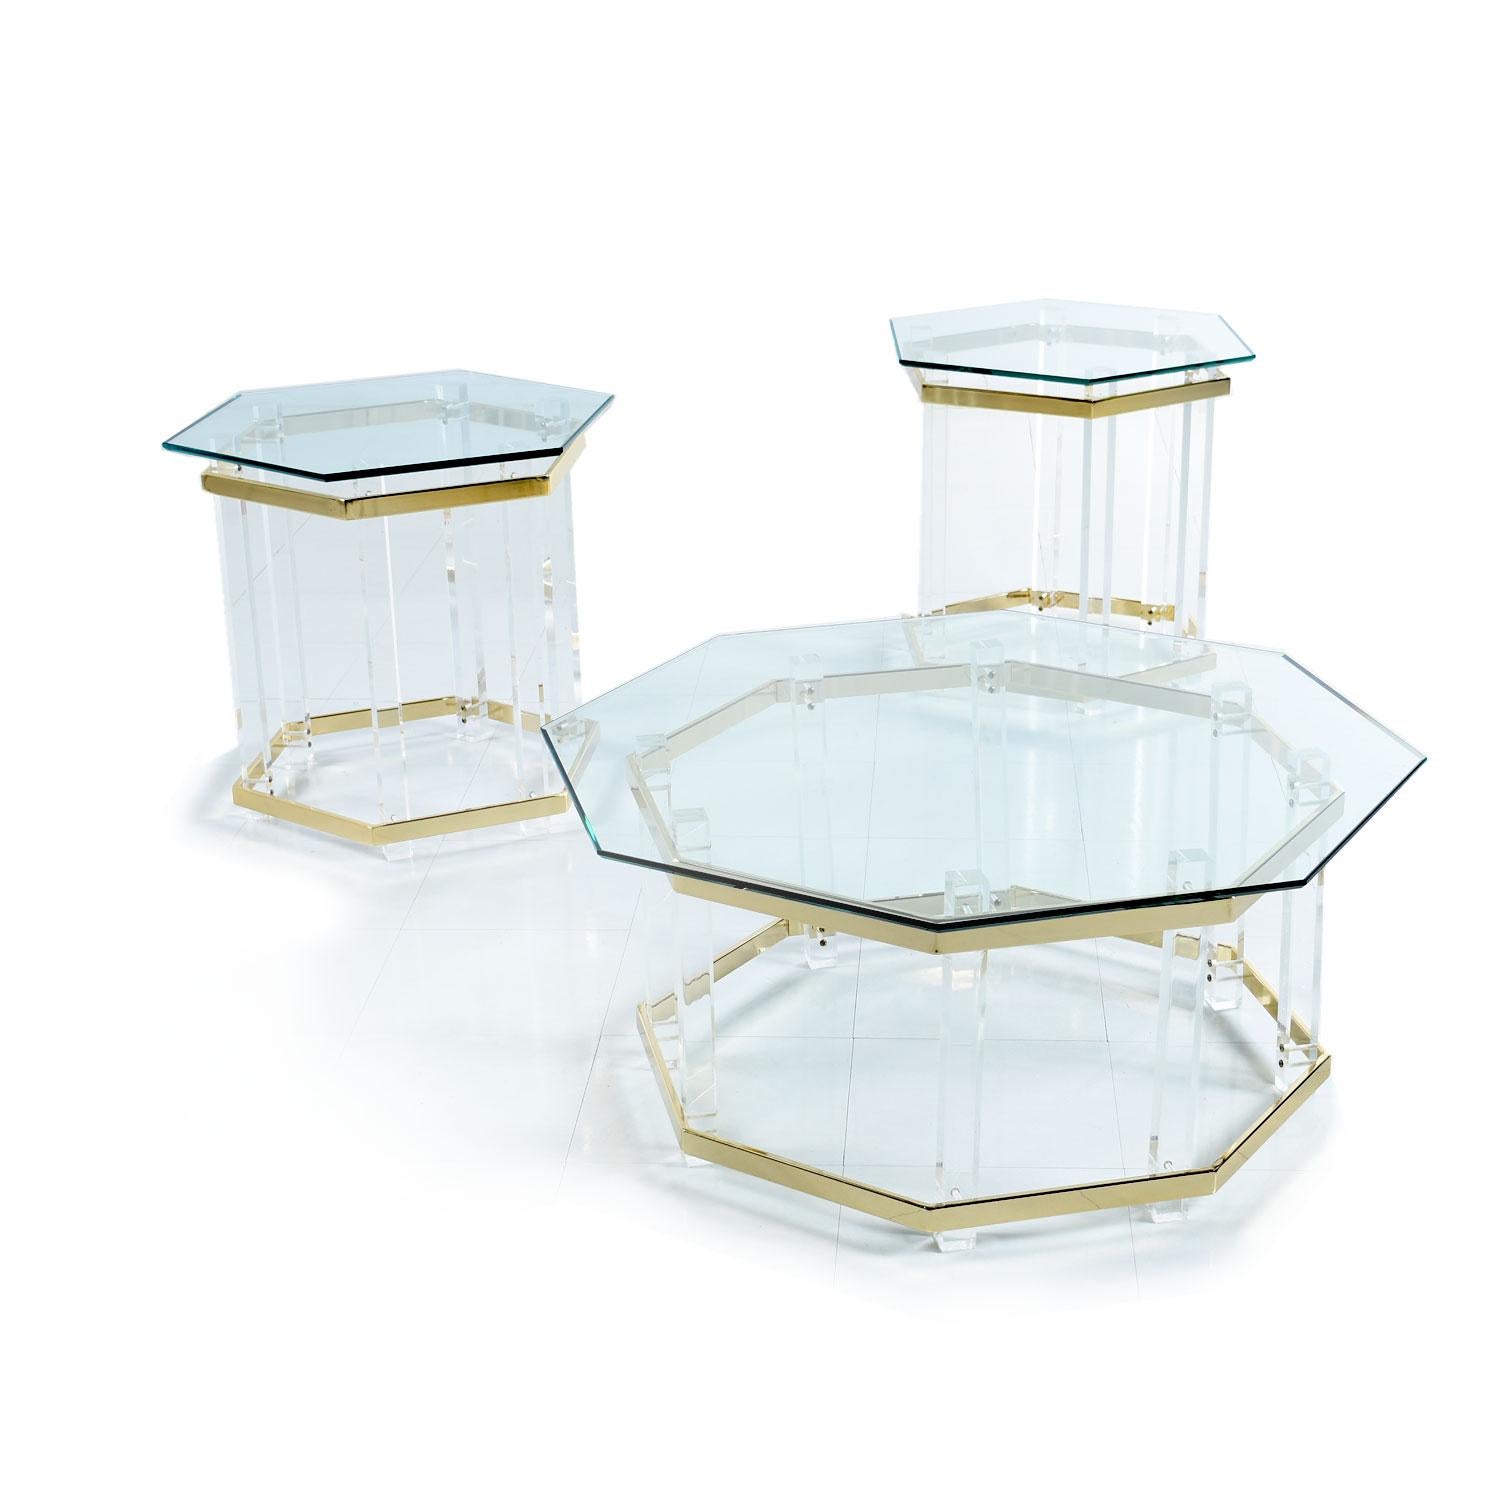 Vintage 1970s Hollywood Regency Acrylic Lucite Glass and Brass End Tables 2